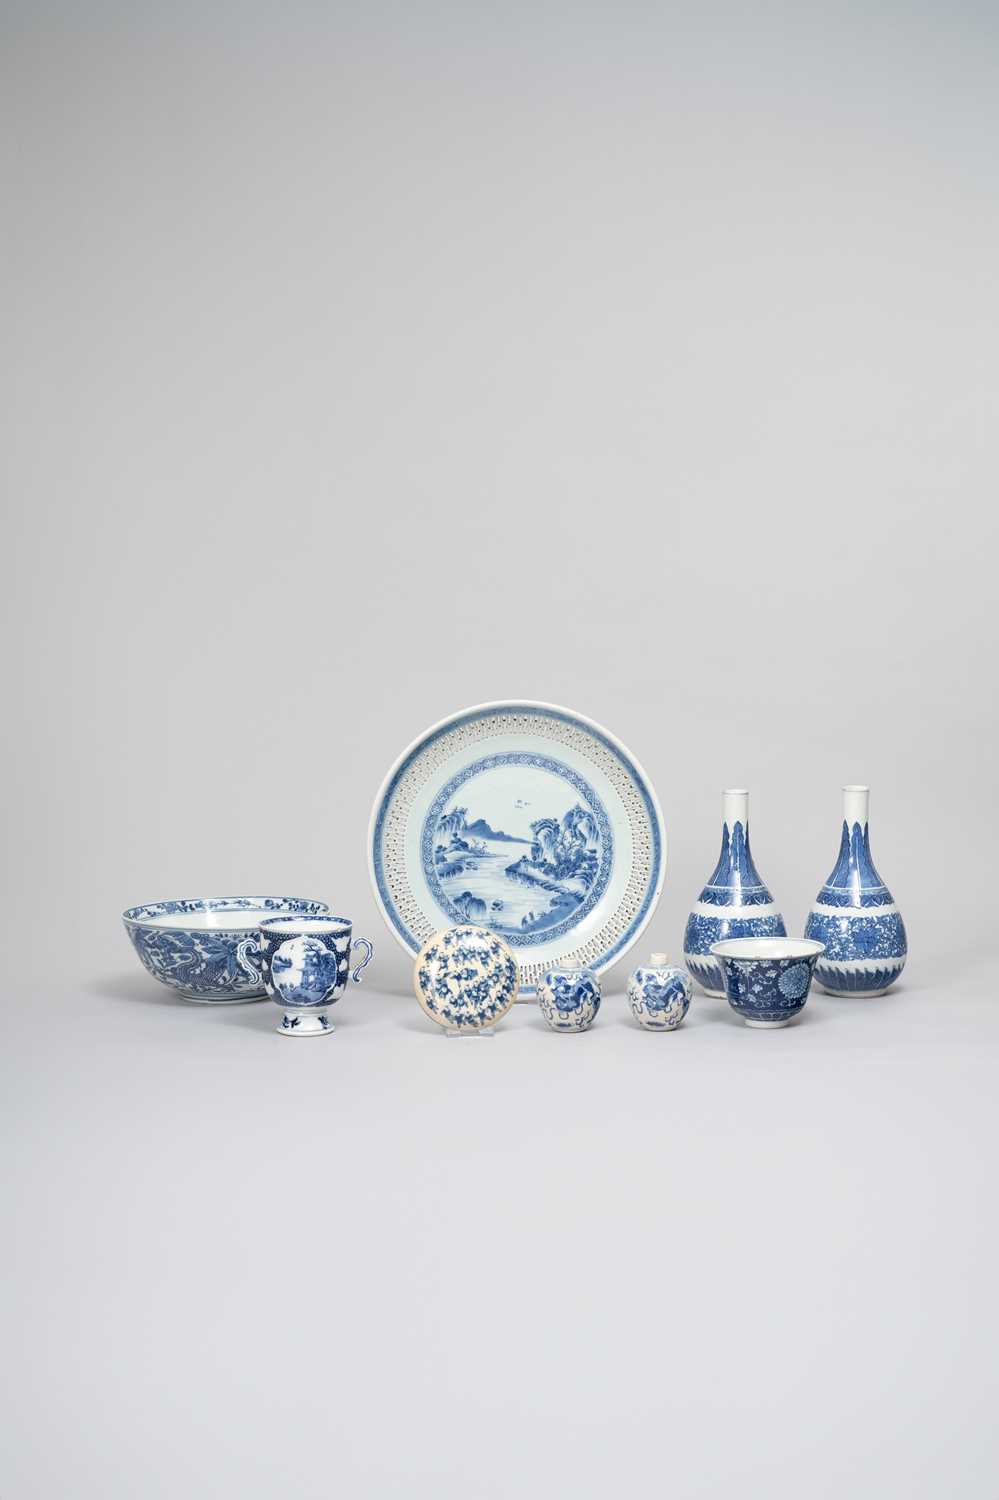 NINE CHINESE BLUE AND WHITE ITEMS QING DYNASTY Comprising: a reticulated dish with a landscape